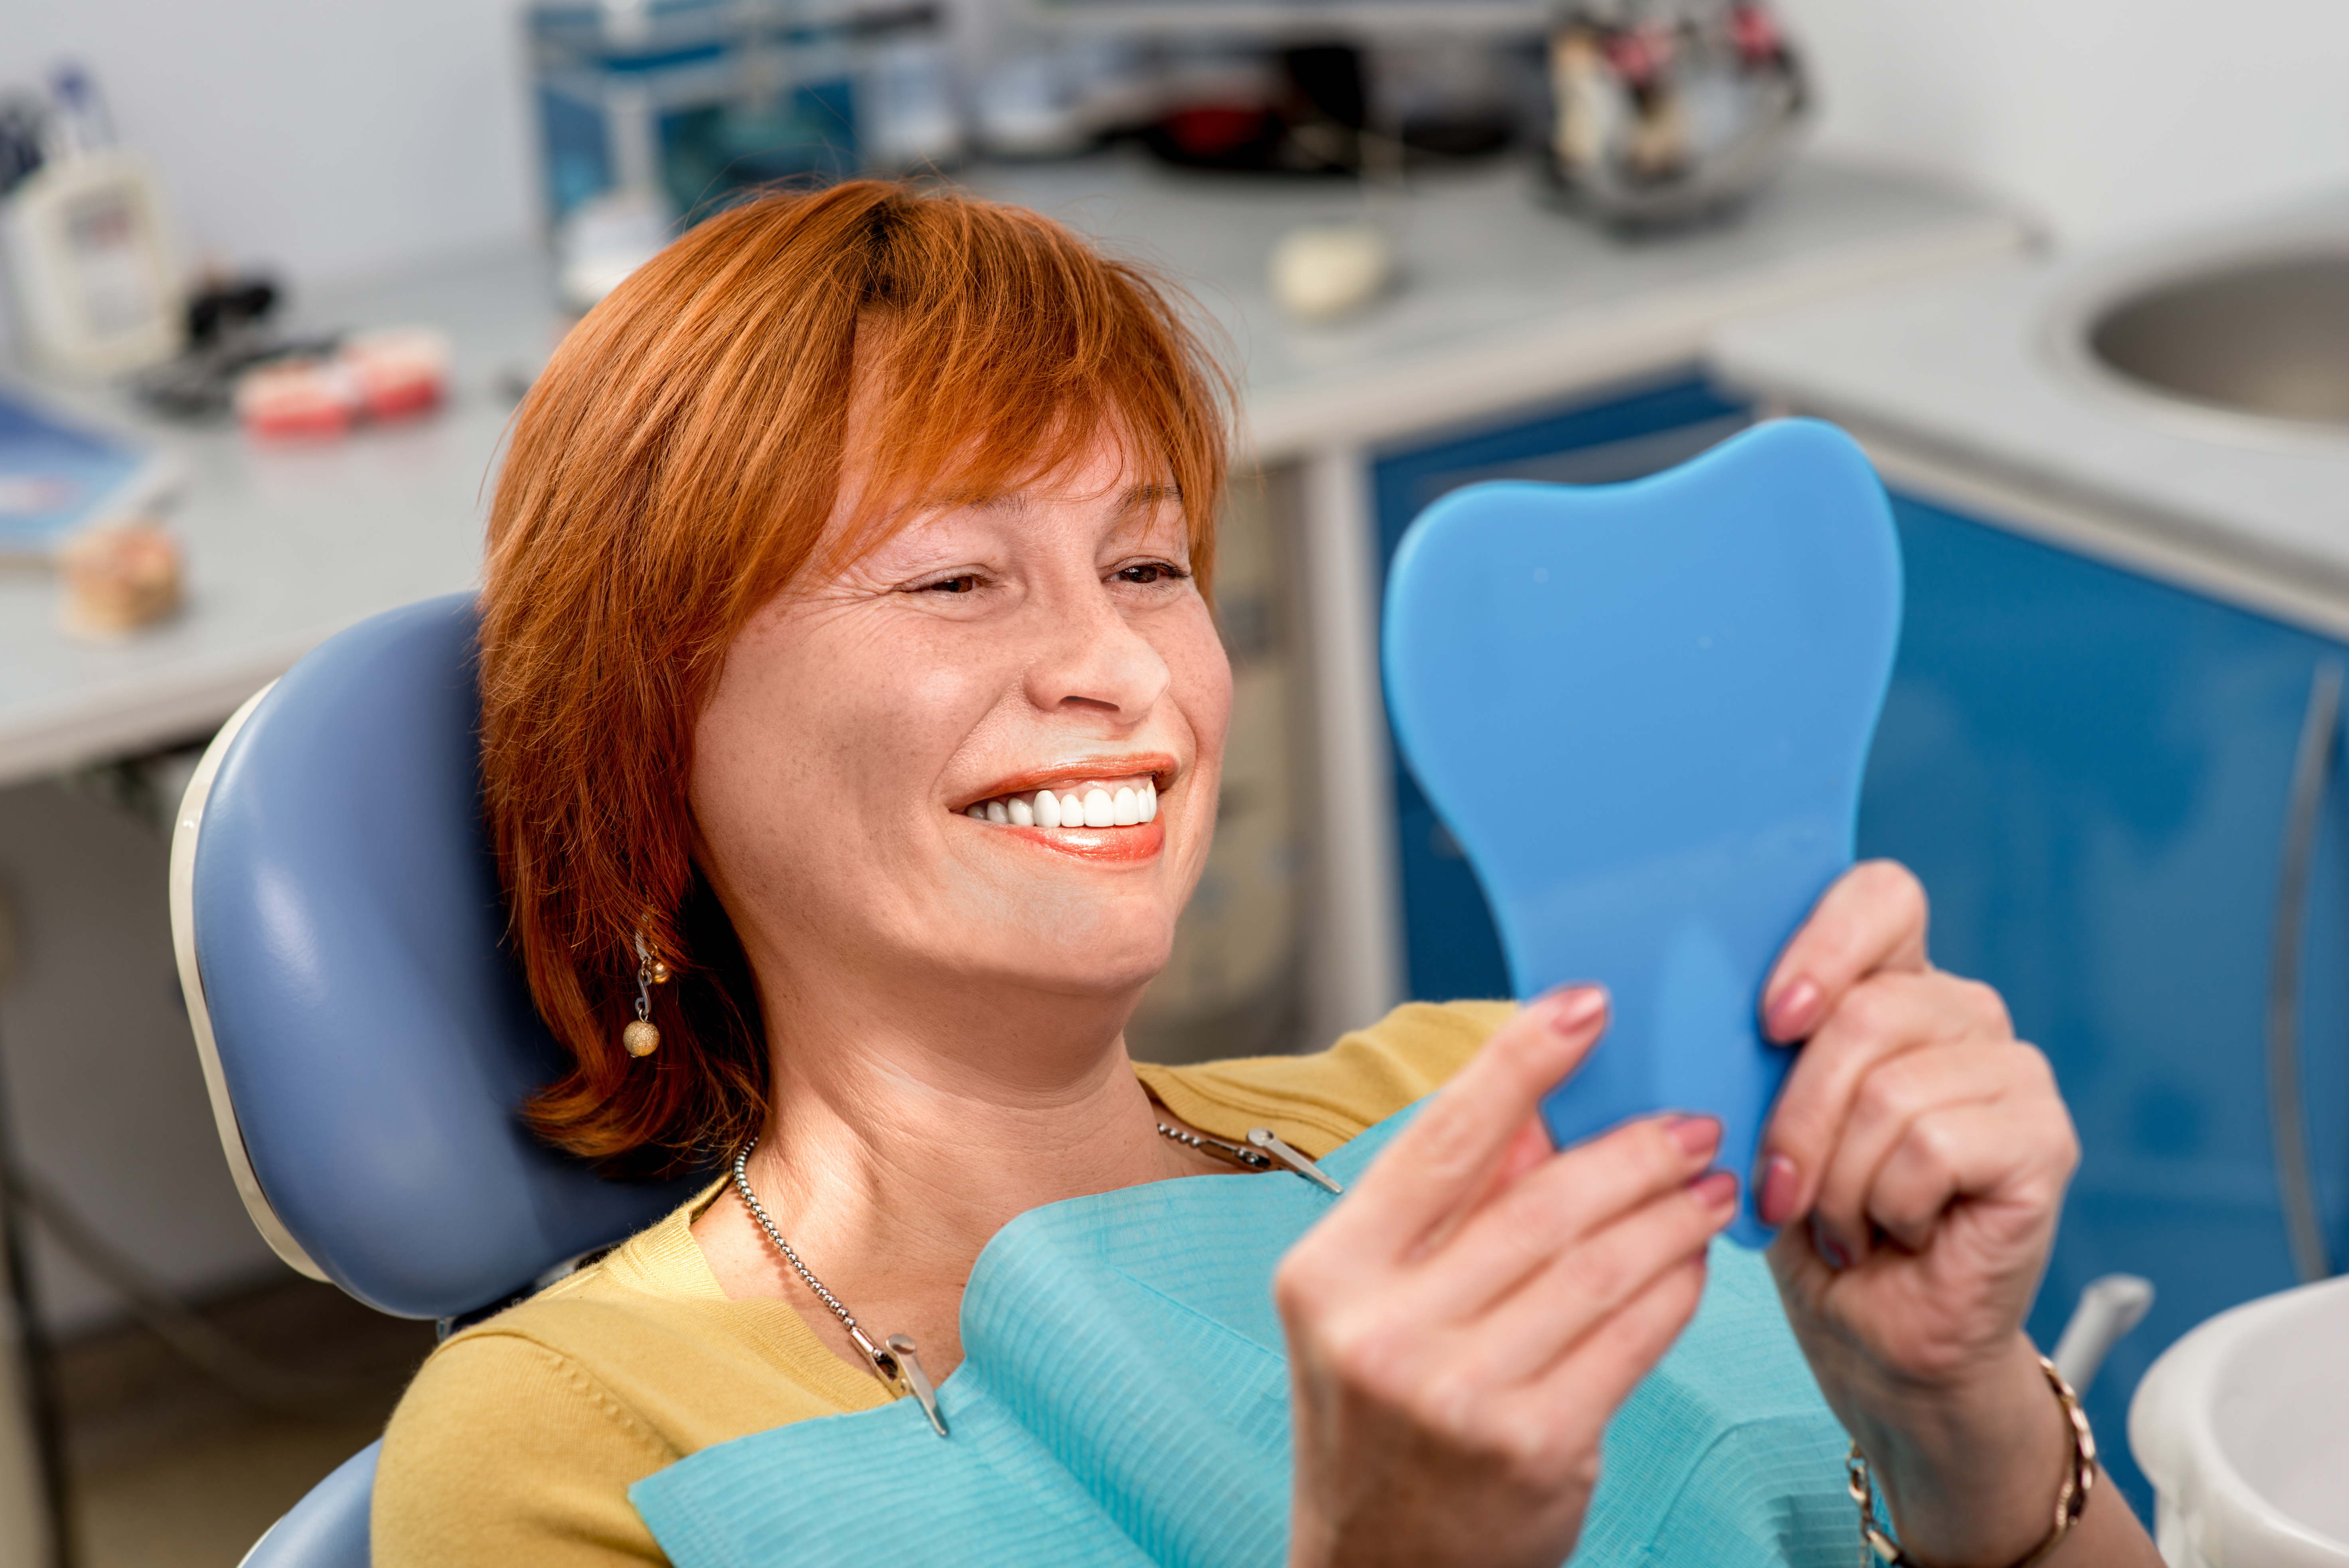 The technology behind pain free dentistry